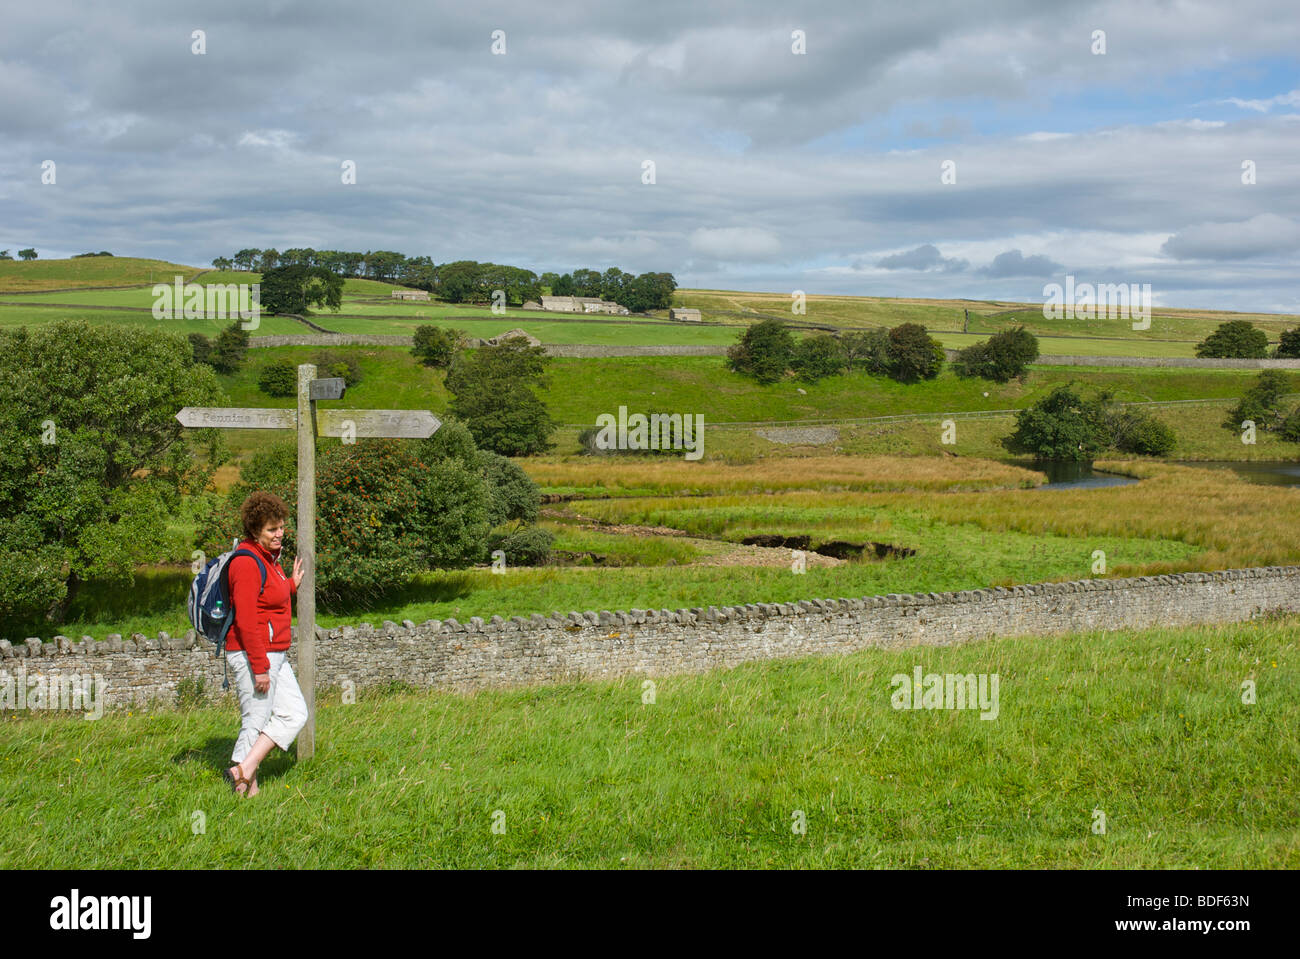 Woman standing next to 'Pennine Way' sign, Baldersdale, County Durham, England UK Stock Photo